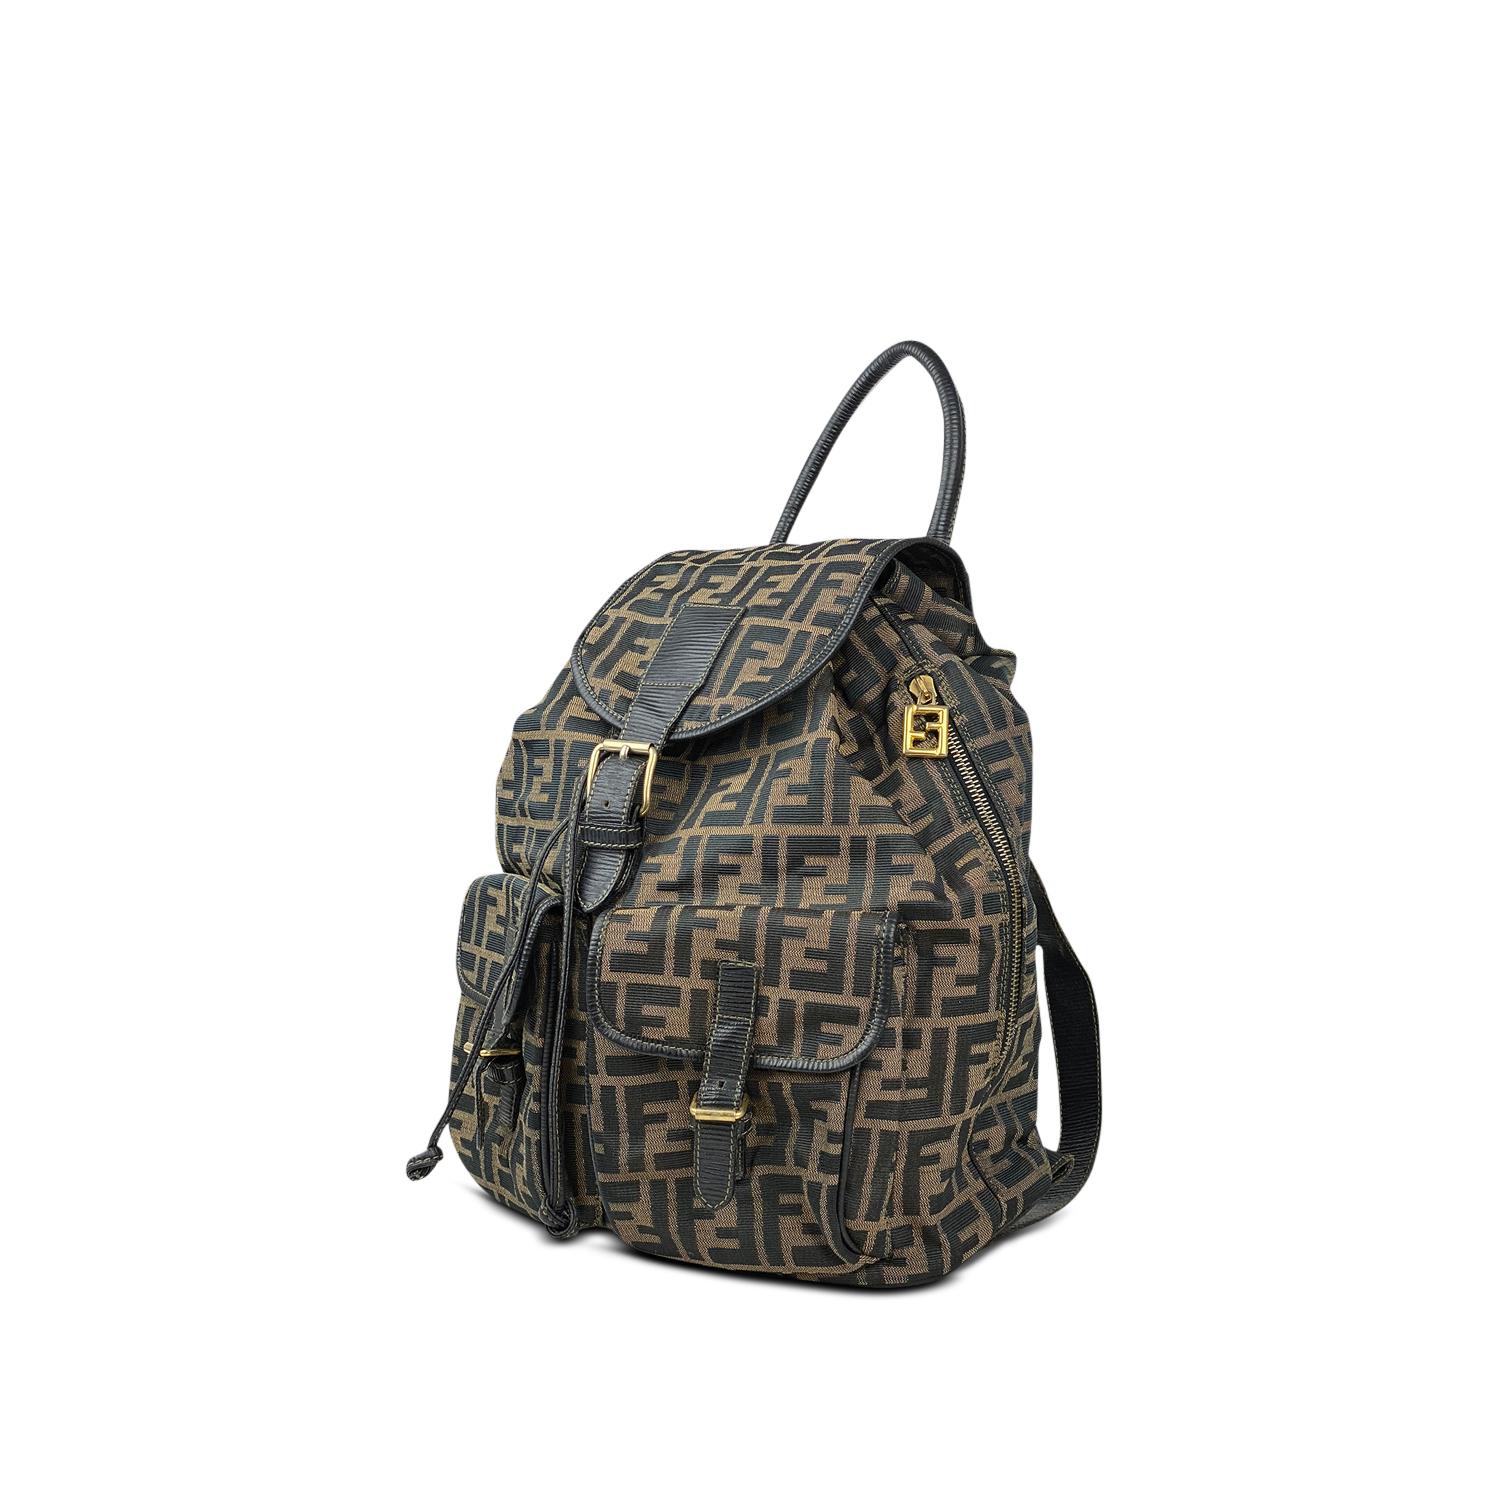 Brown and tan canvas Fendi FF backpack with

- Gold-tone hardware
- Dual flat shoulder strap
- Brown leather trim
- Brown interior lining with a zip pocket at interior wall and drawstring closure at top 
- Dual exterior pockets and a zip opening on